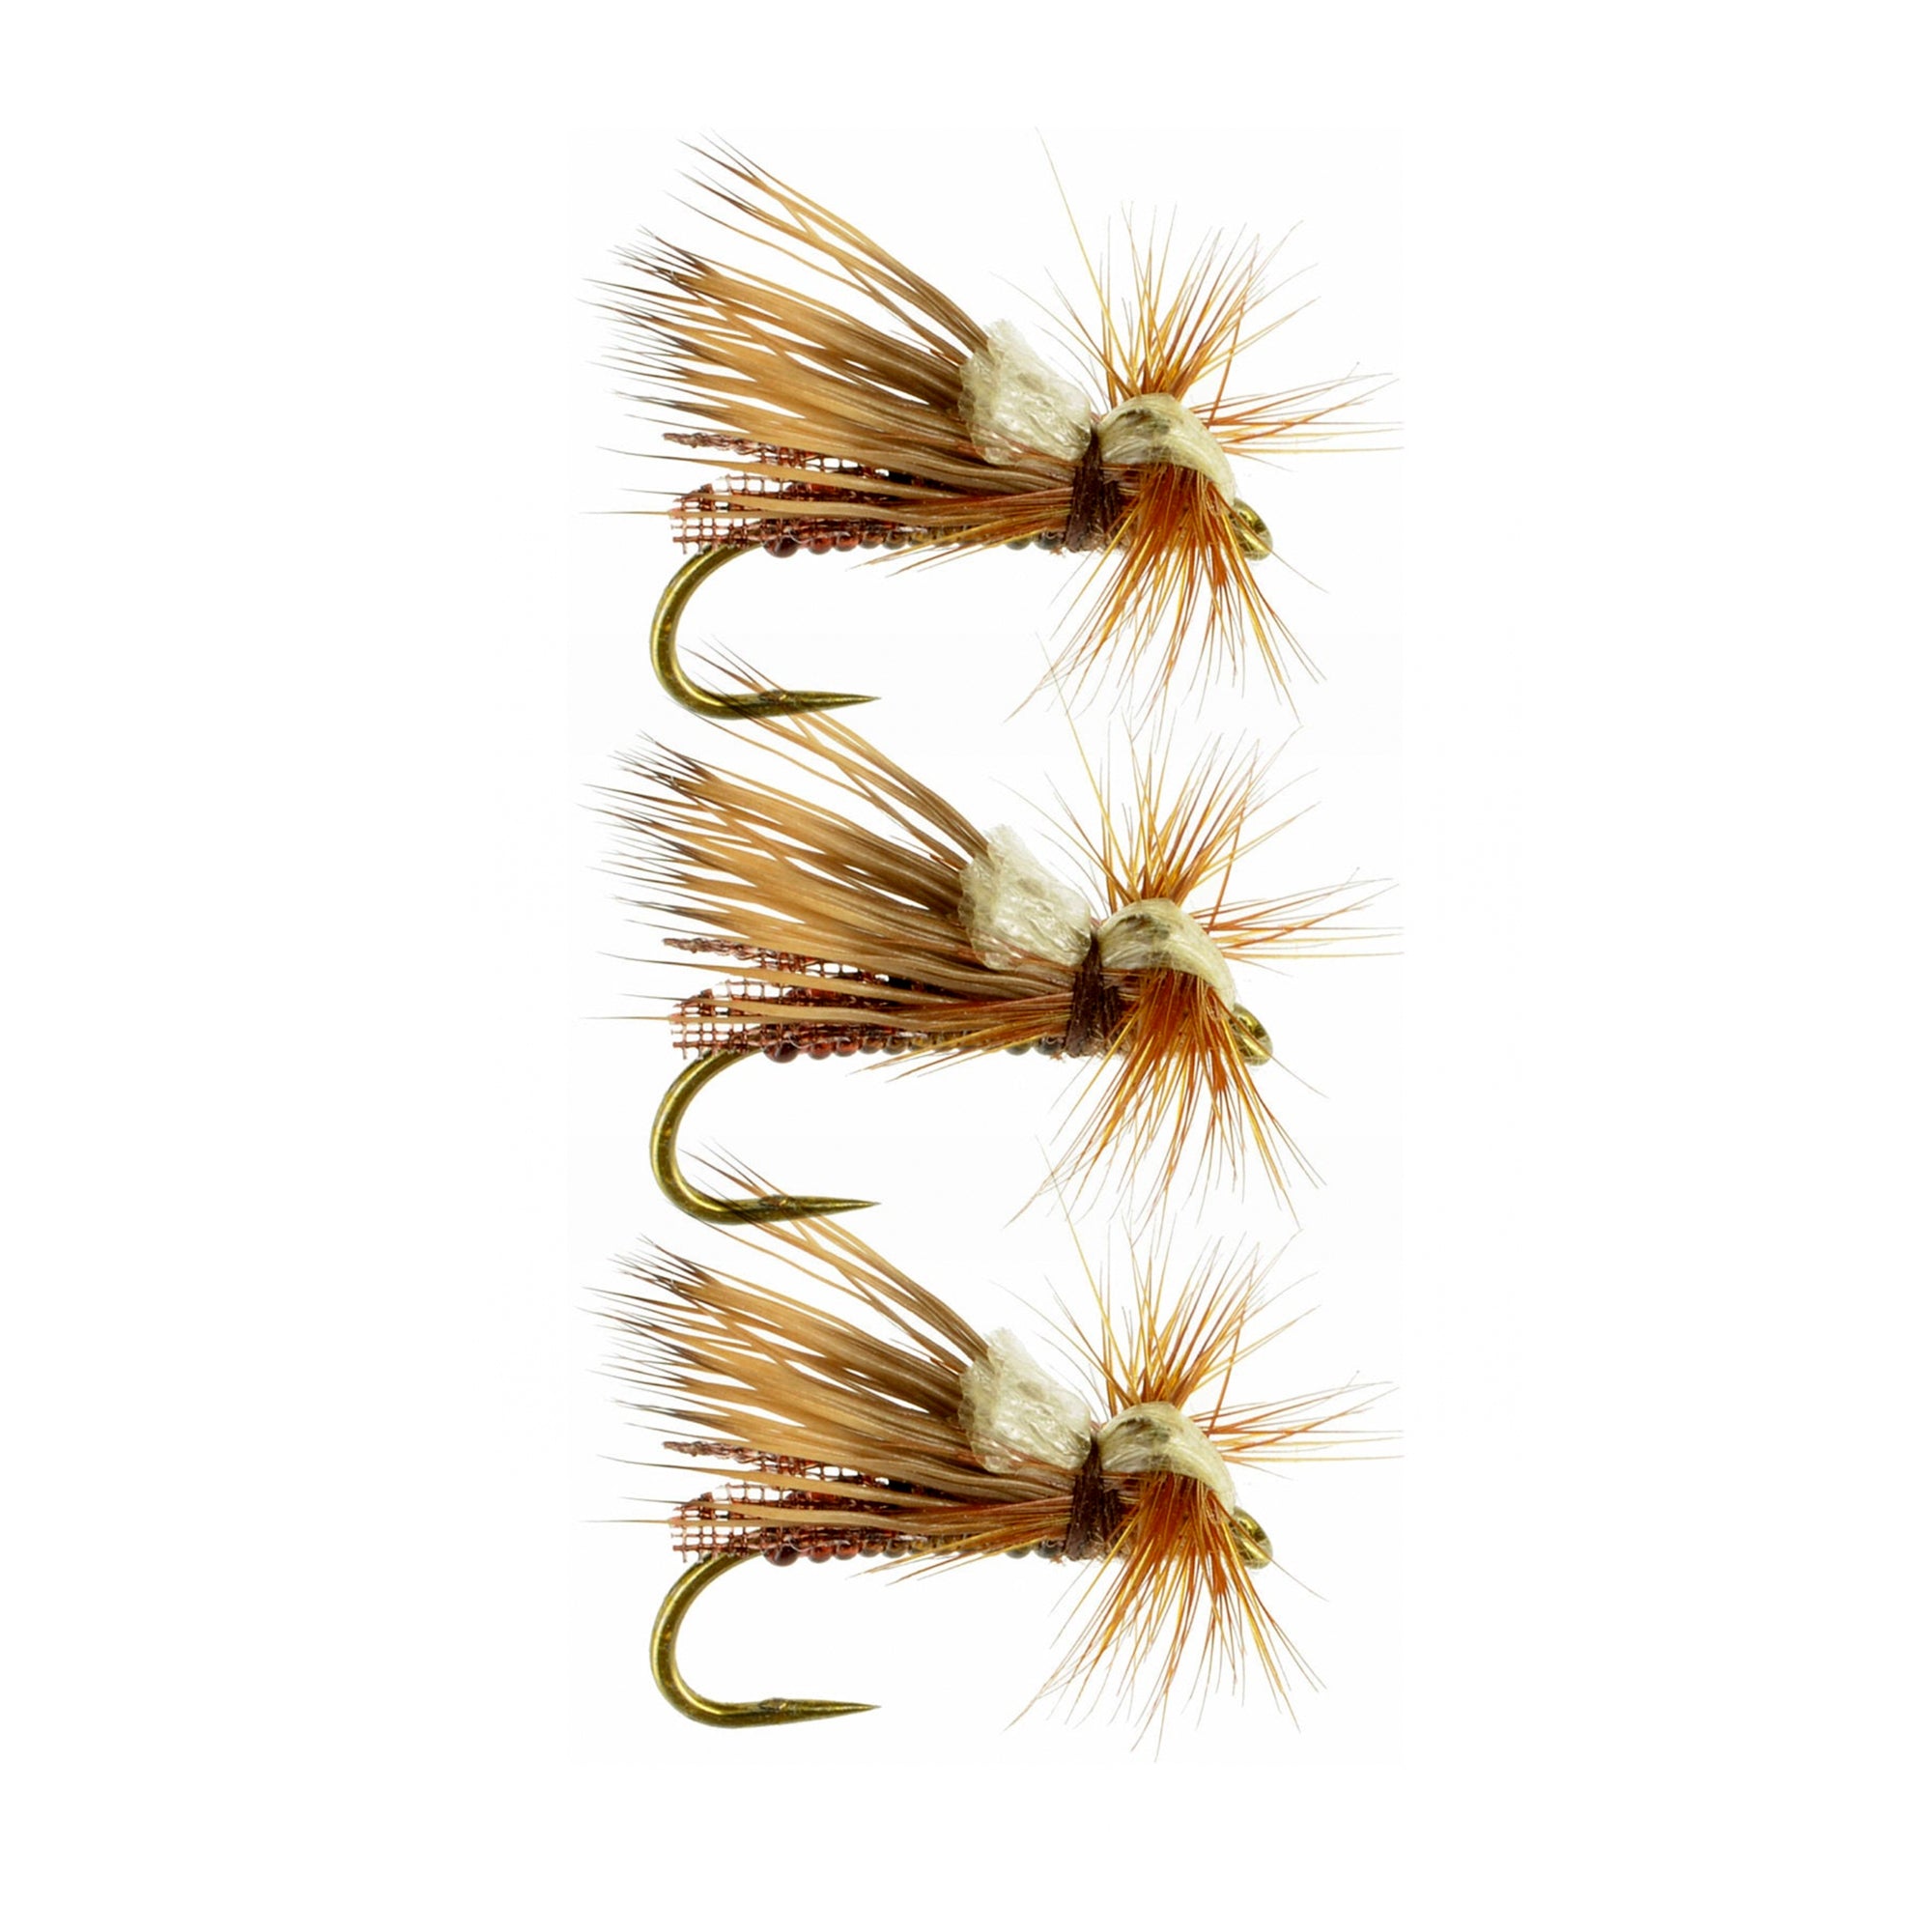 Outrigger Caddis Dry Fly for Trout